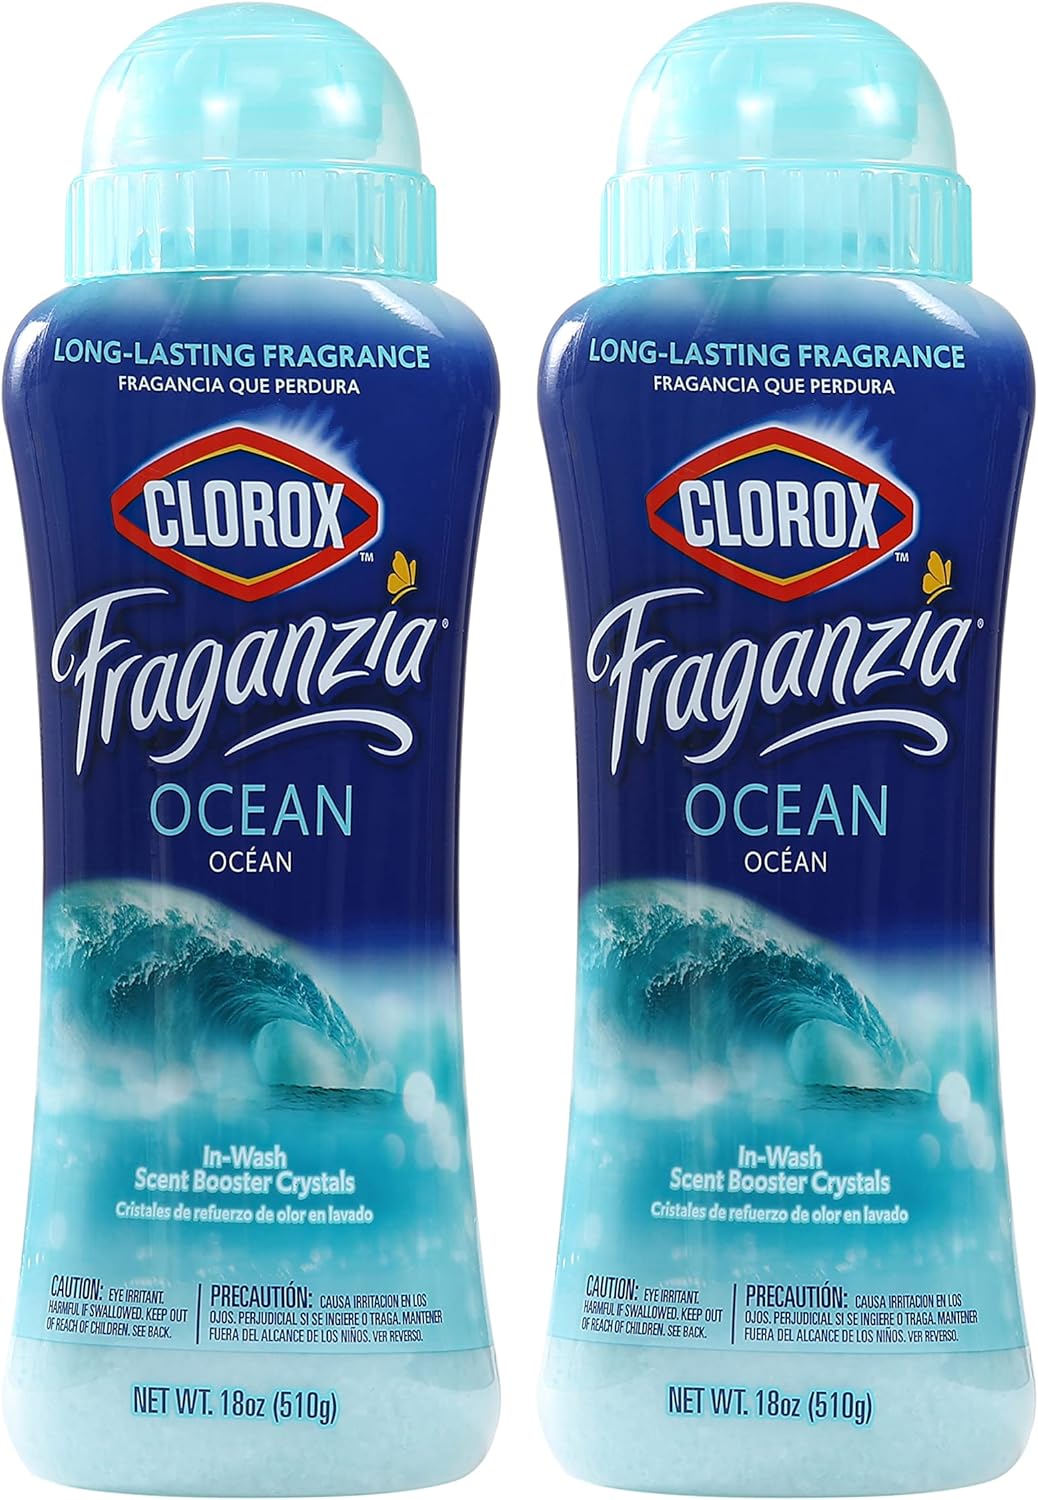 Clorox Fraganzia In-Wash Scent Booster Crystals in Ocean Scent, 18 Oz Twin Pack | Laundry Scent Booster Crystals | In-wash Scent Booster for Fresh Laundry in Ocean Scent 18 Ounce Twin Pack, 36oz